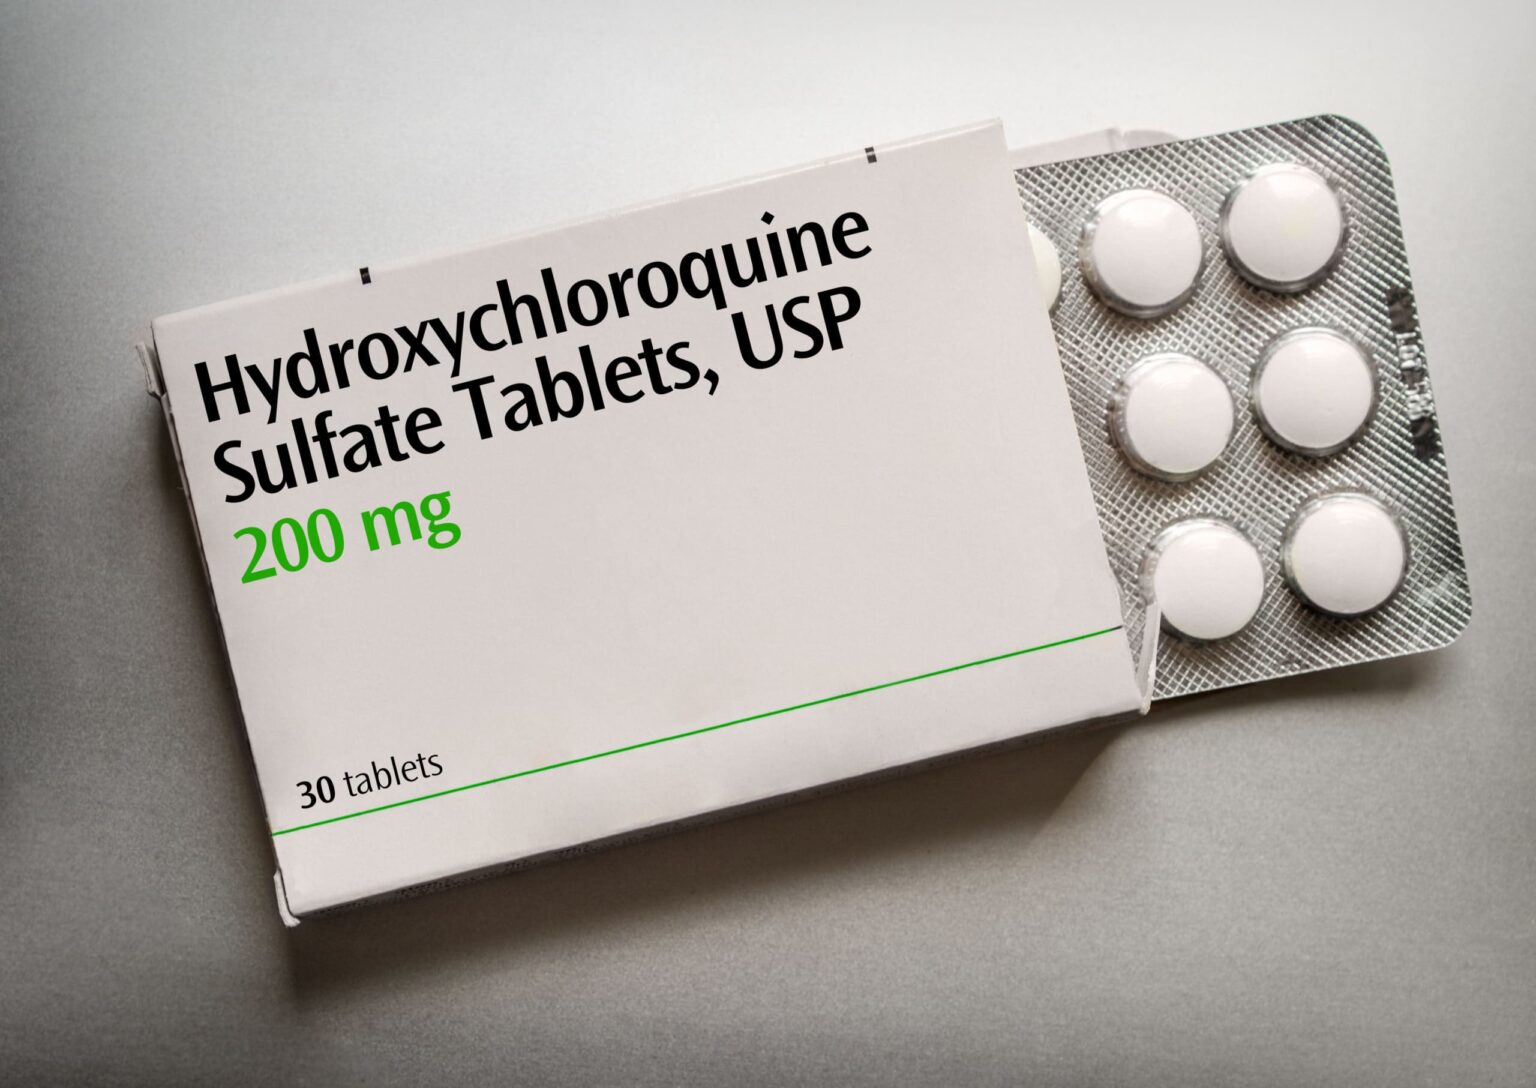 The medical community’s been debating about the effectiveness of the hydroxychloroquine drug in the treatment of COVID-19. Here's what we know.